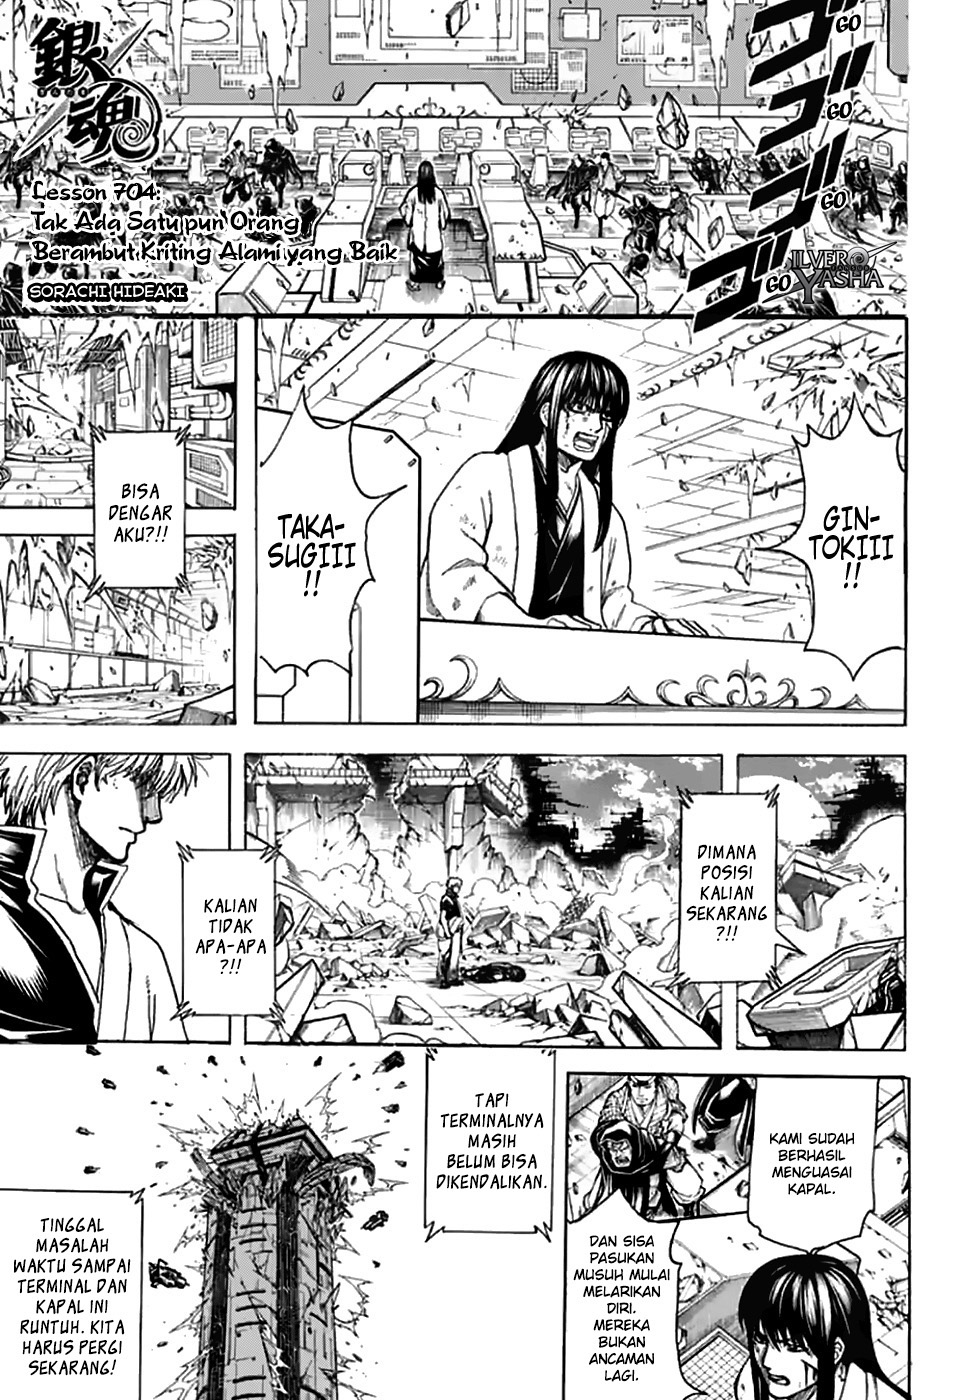 Gintama: Chapter 704 - Page 1